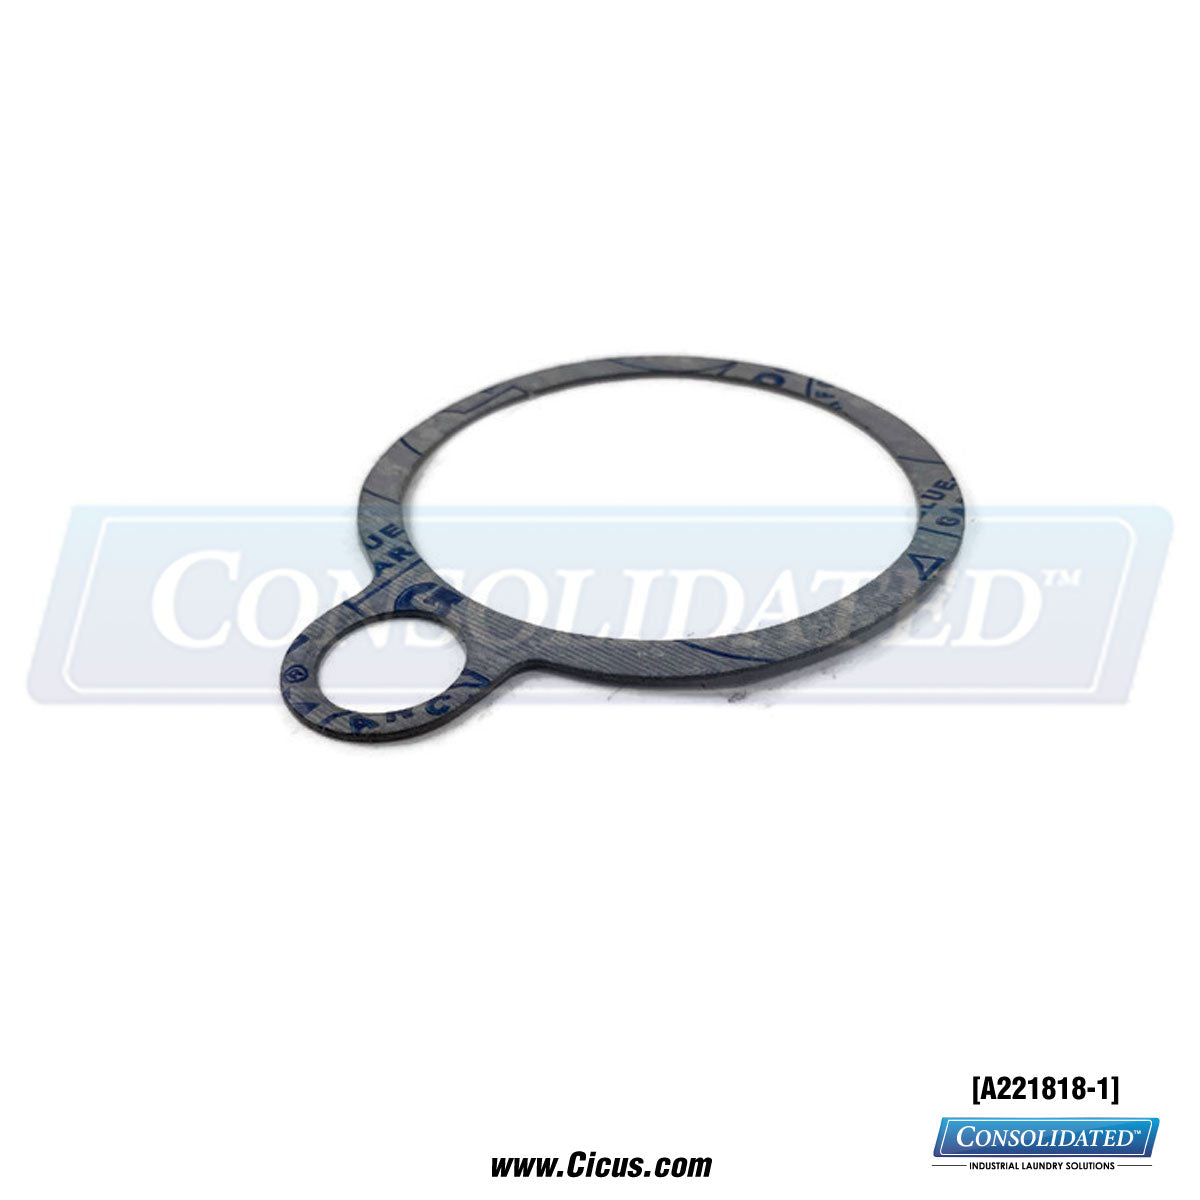 Armstrong 812 - 3/4" Gasket Repair Kit [A221818-1] - Front View